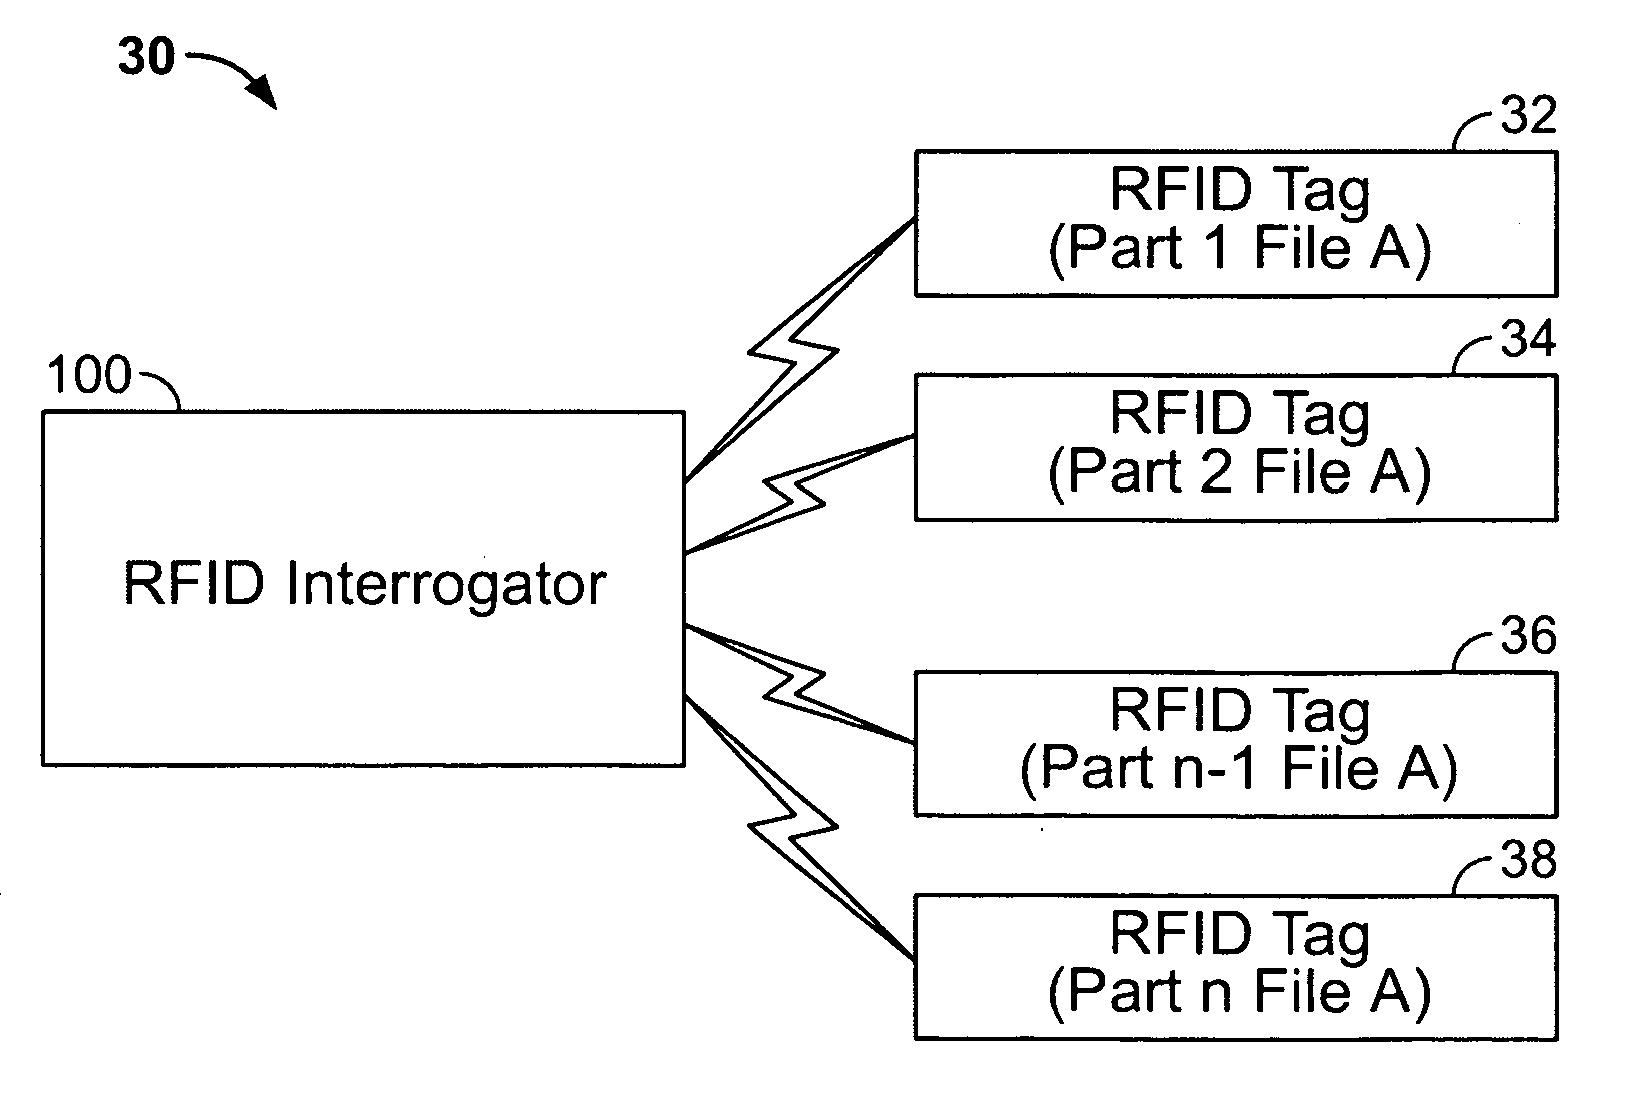 System for using RFID tags as data storage devices